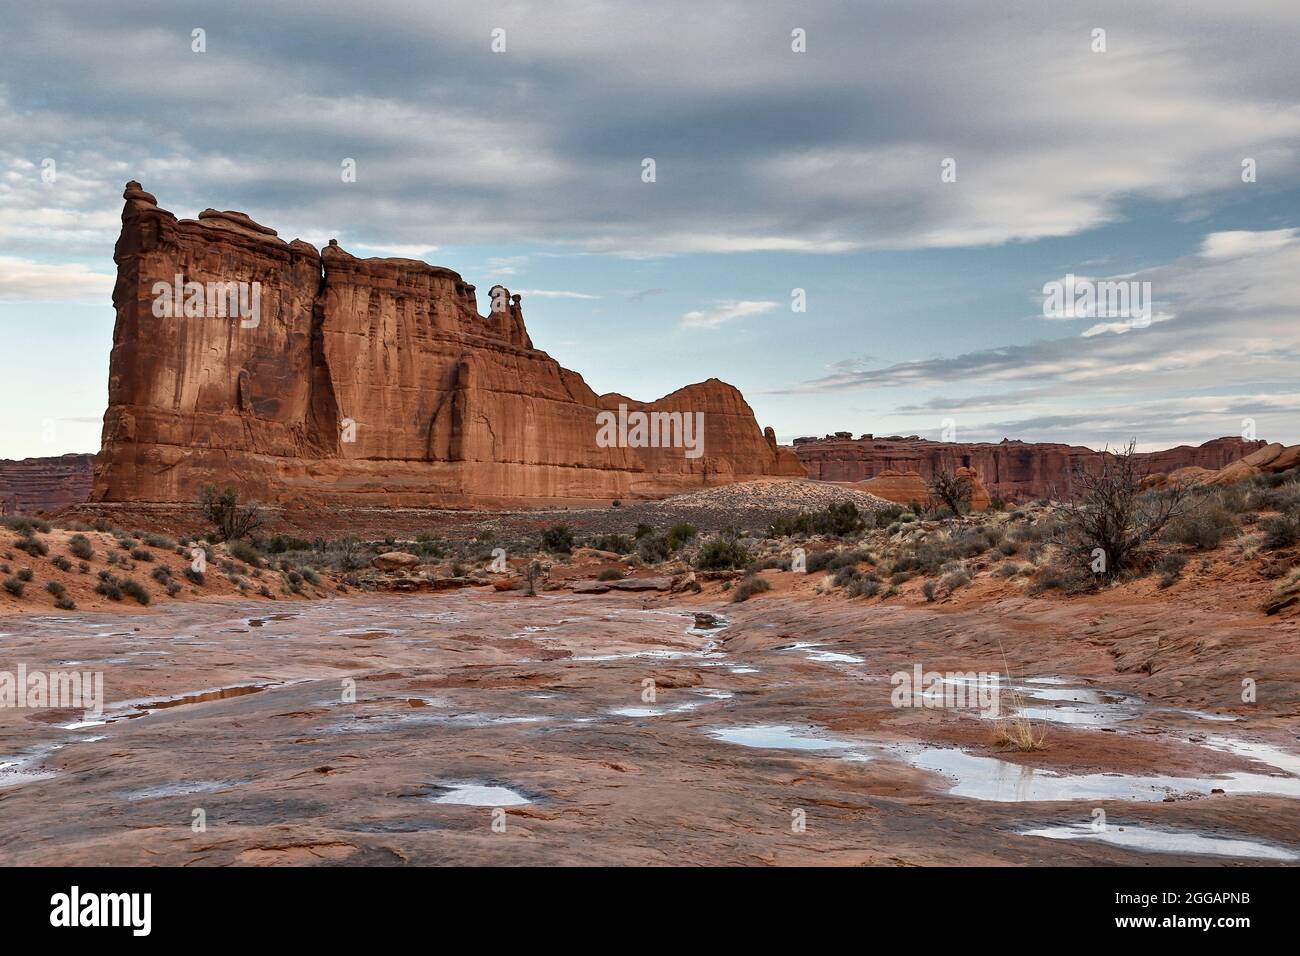 Courthouse Towers sandstone formation and potholes on Park Avenue, Arches National Park, Moab, Utah USA Stock Photo